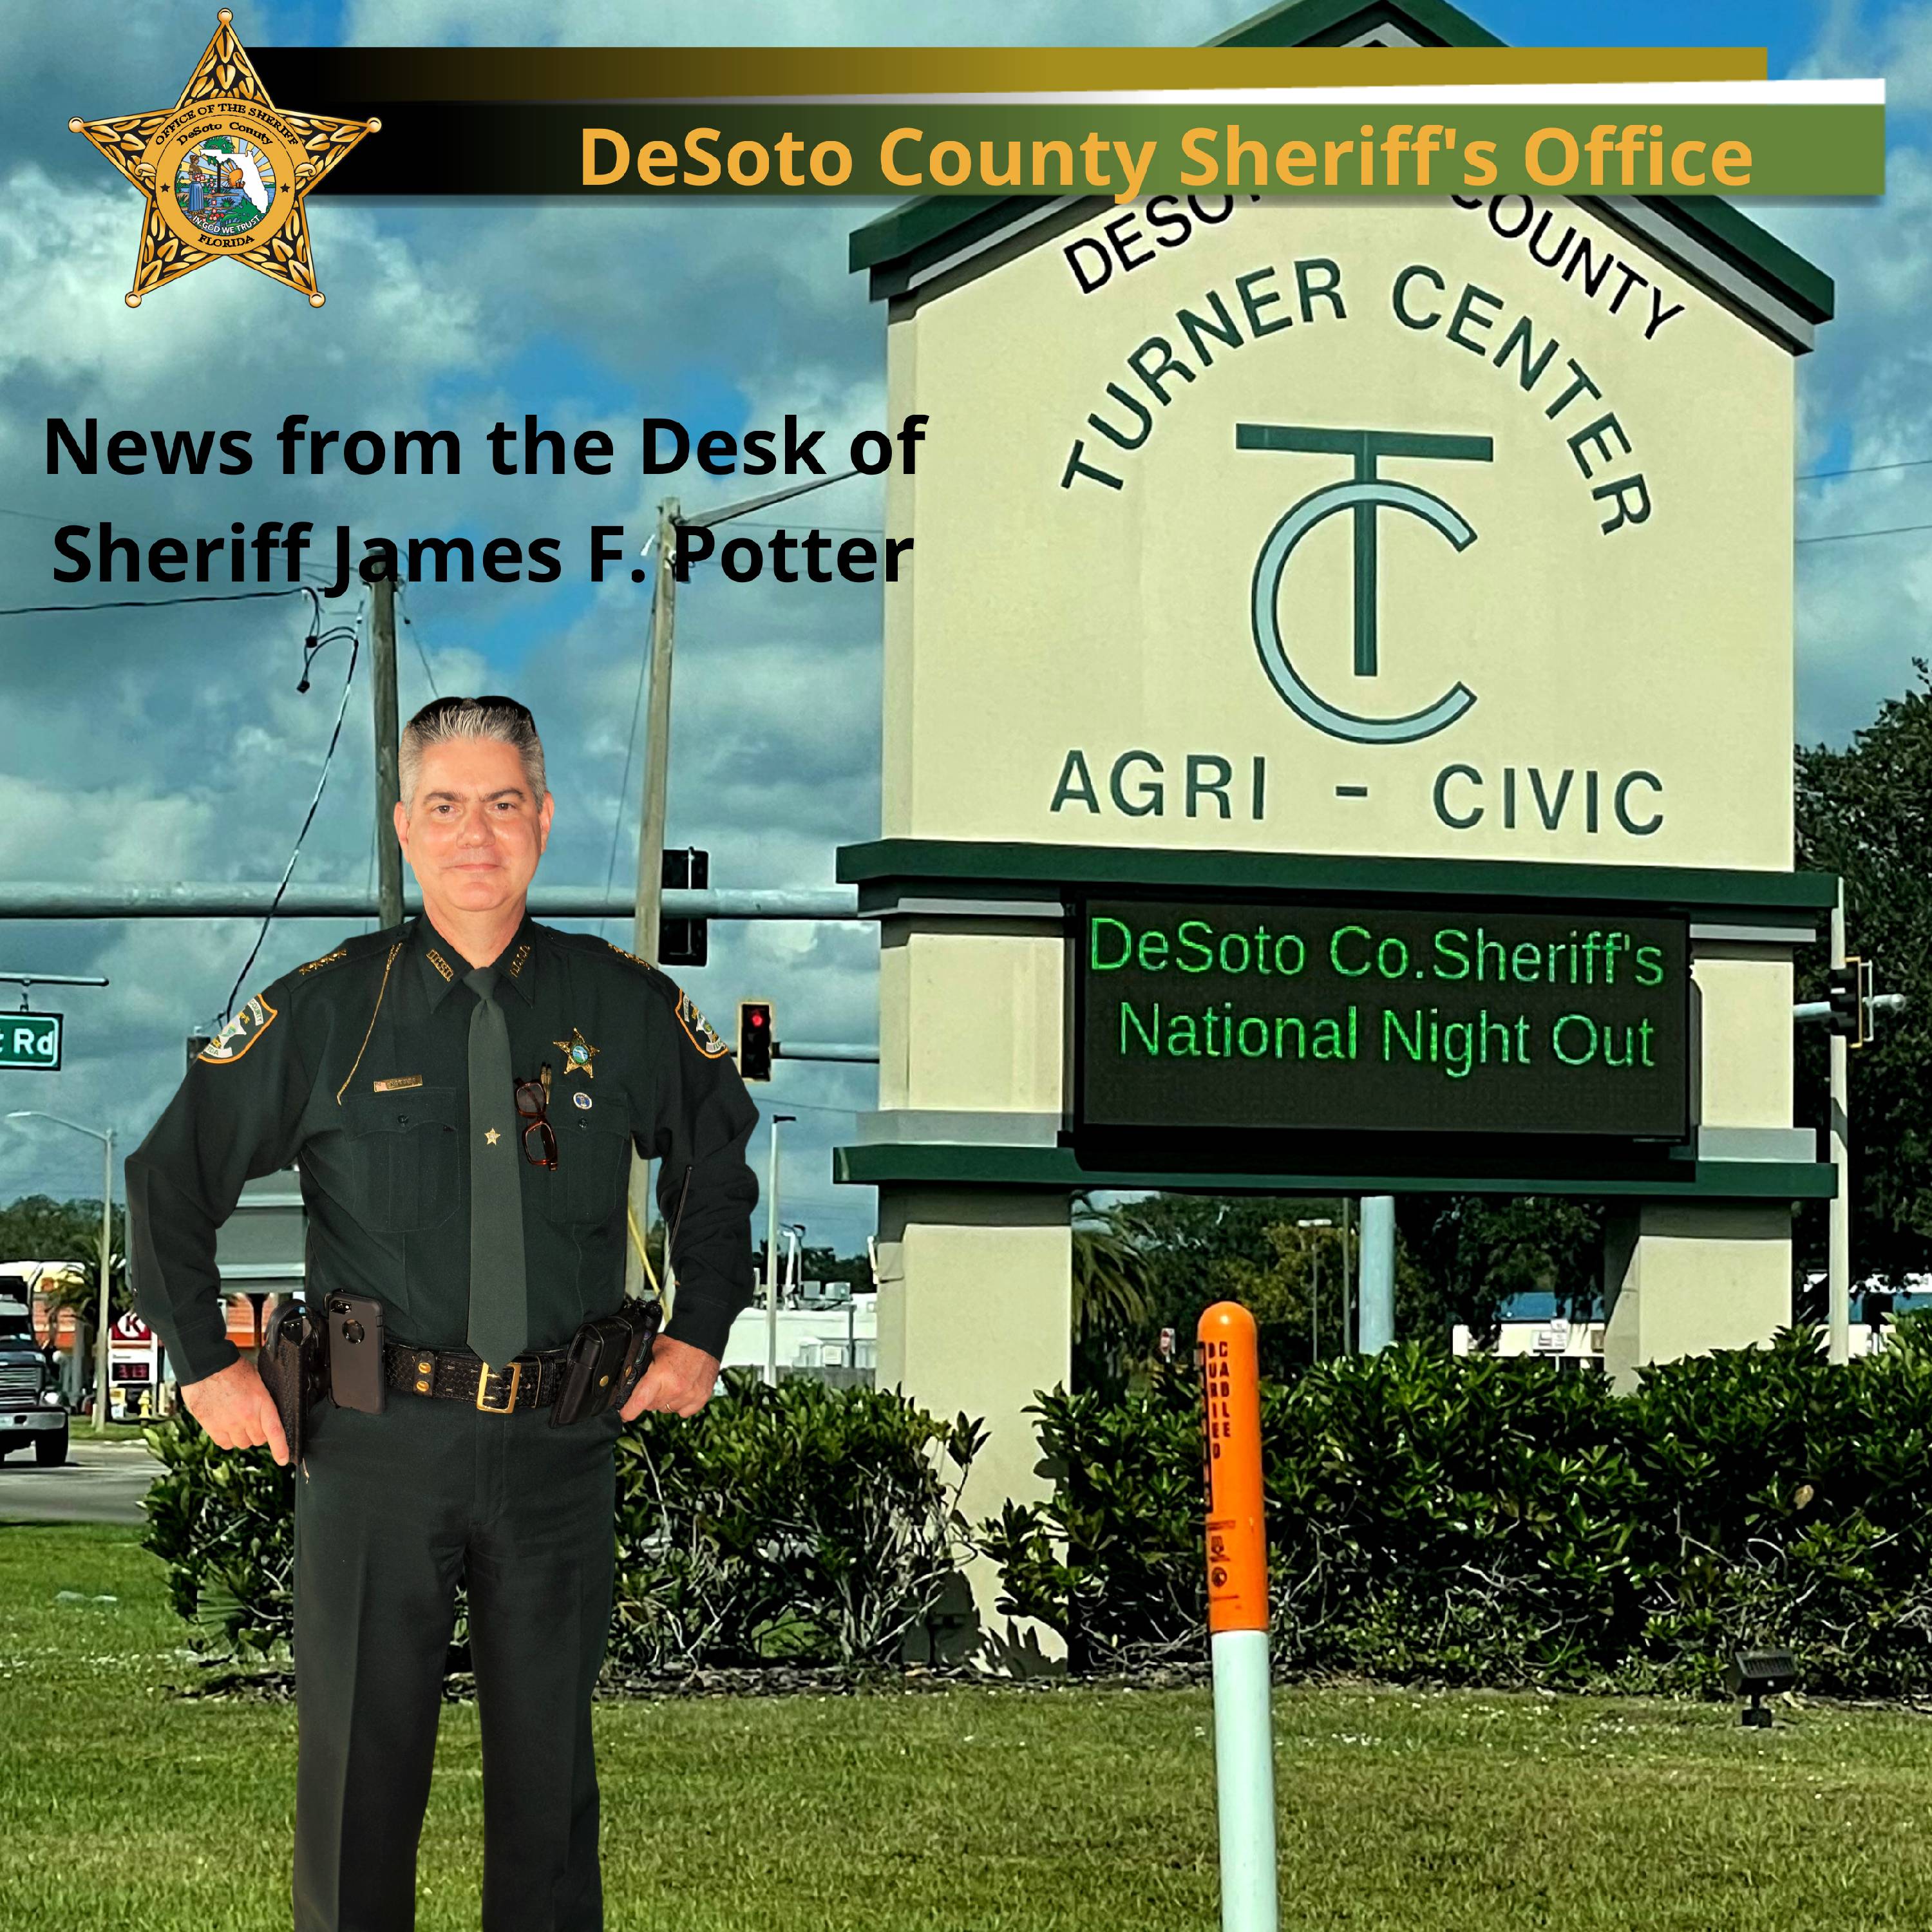 Sheriff Potter standing in front of the Turner Center message board reading DeSoto County Sheriff's Office National Night Out - Copy